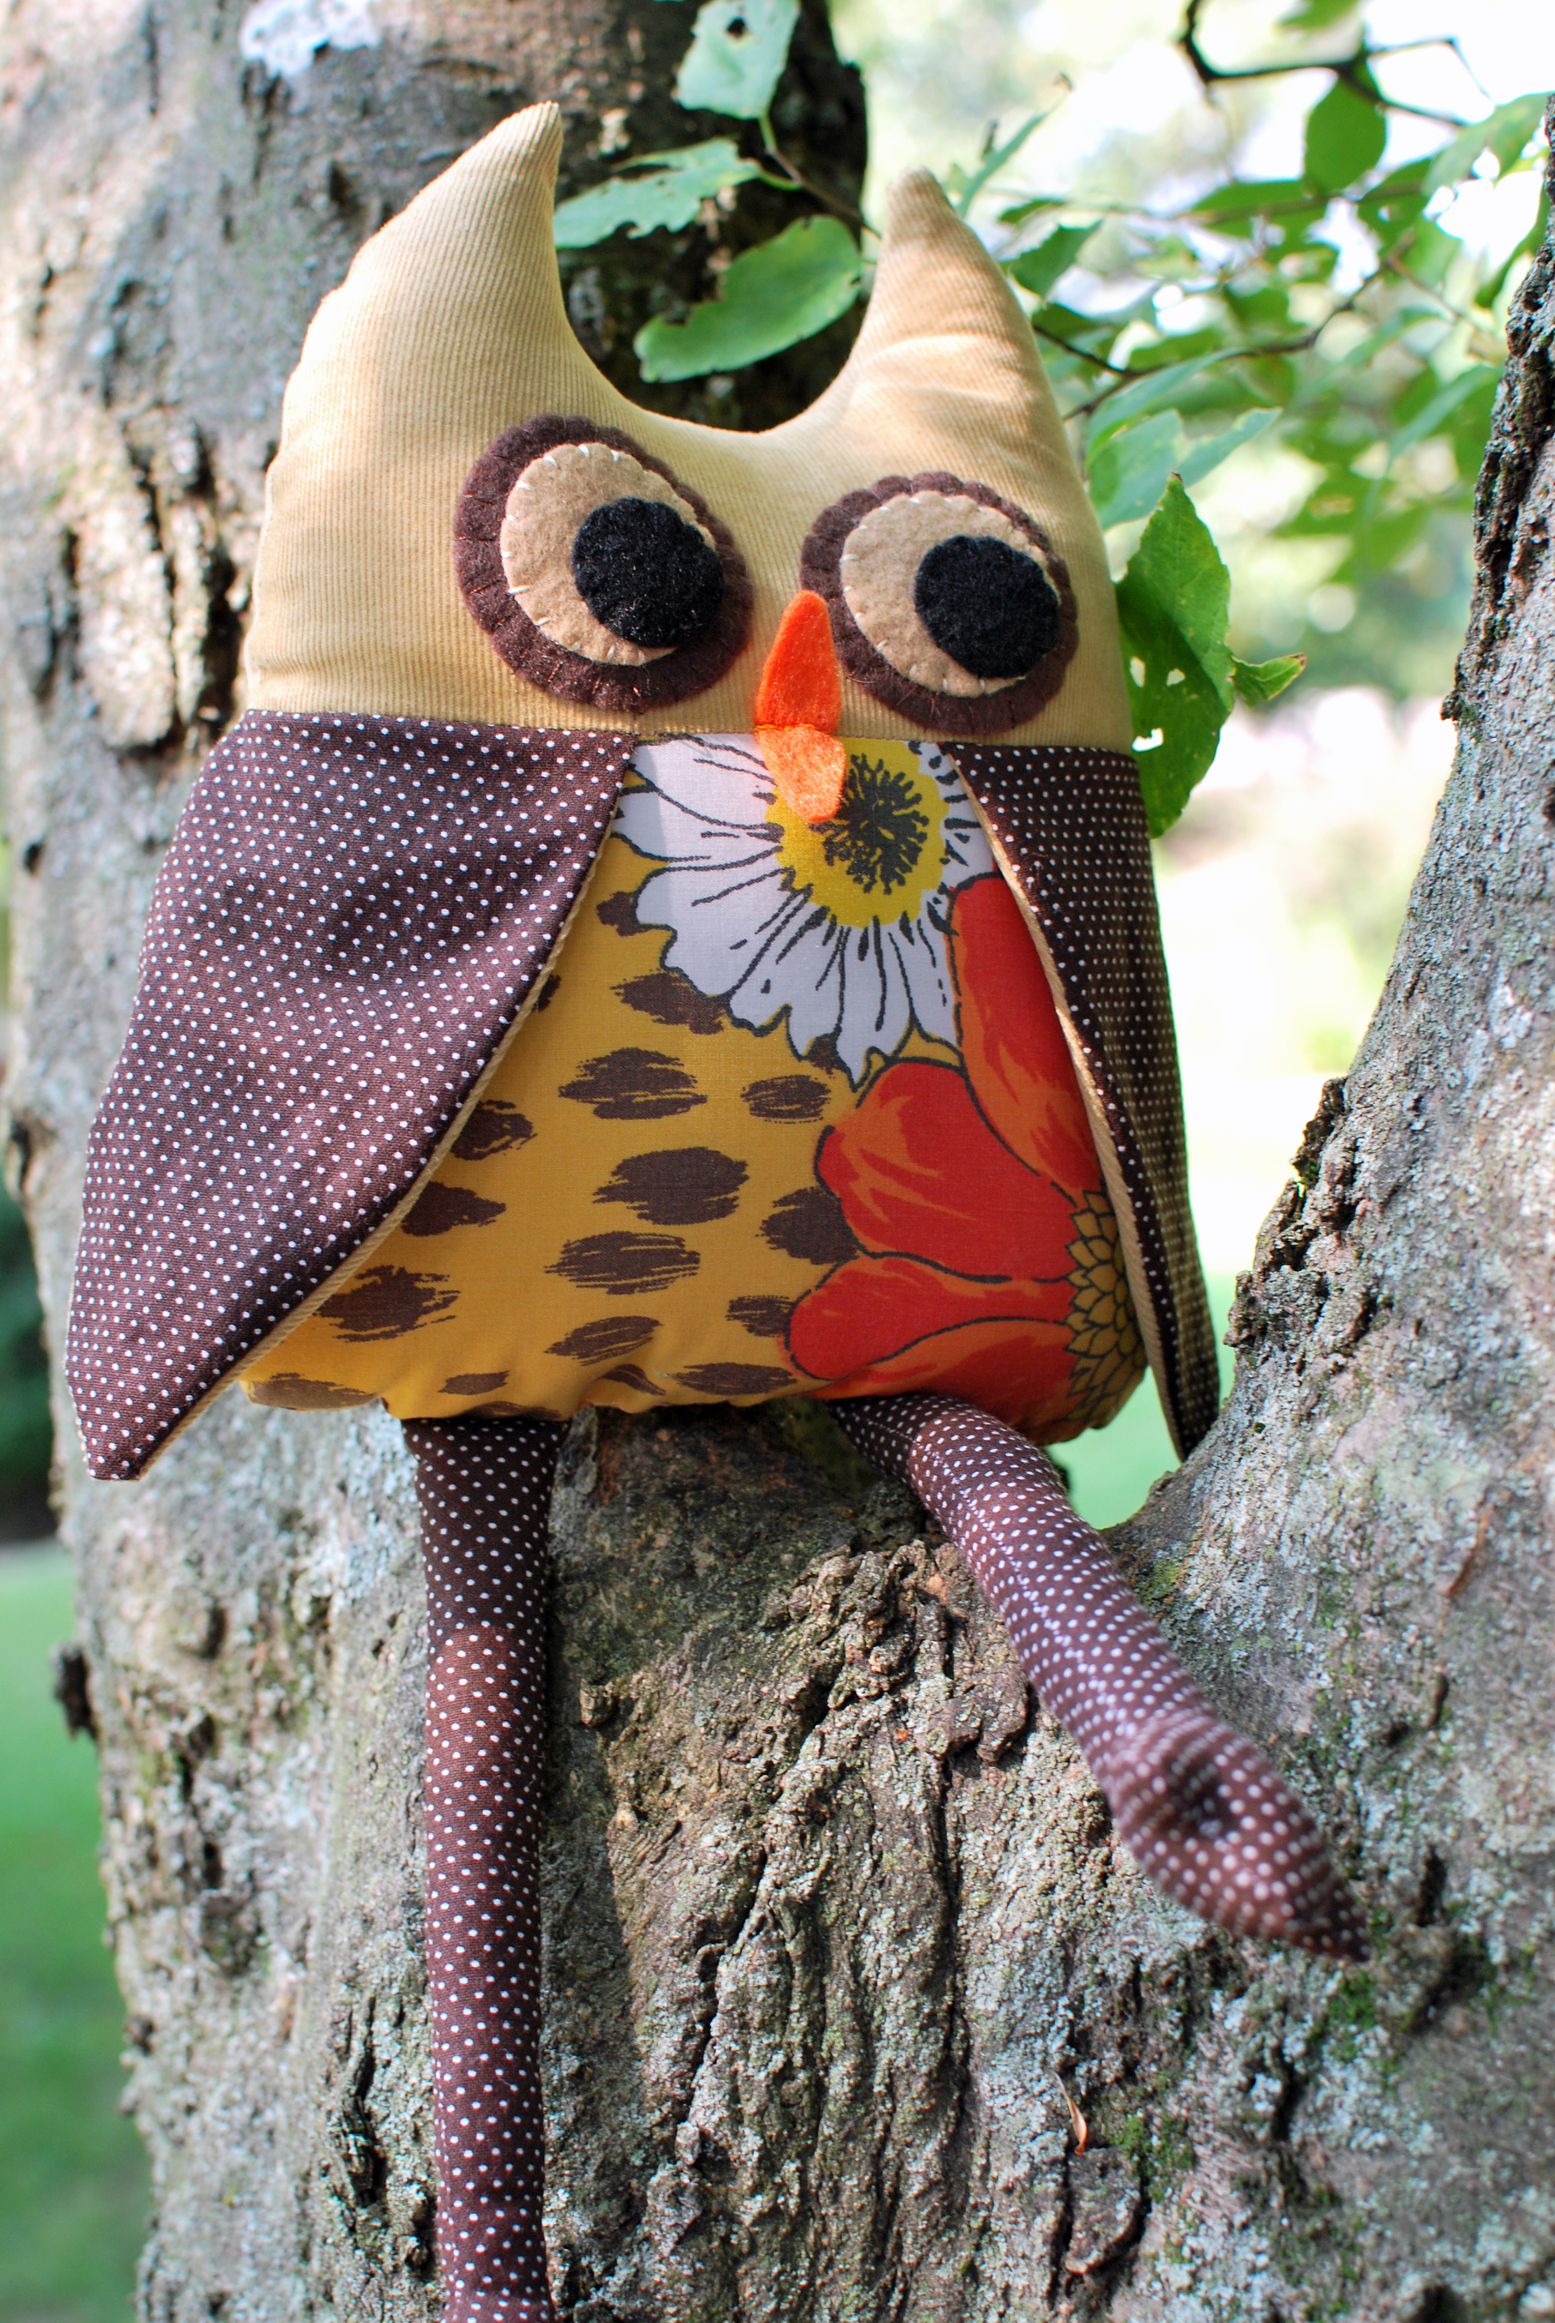 Hootie the Upcycled Owl Tutorial